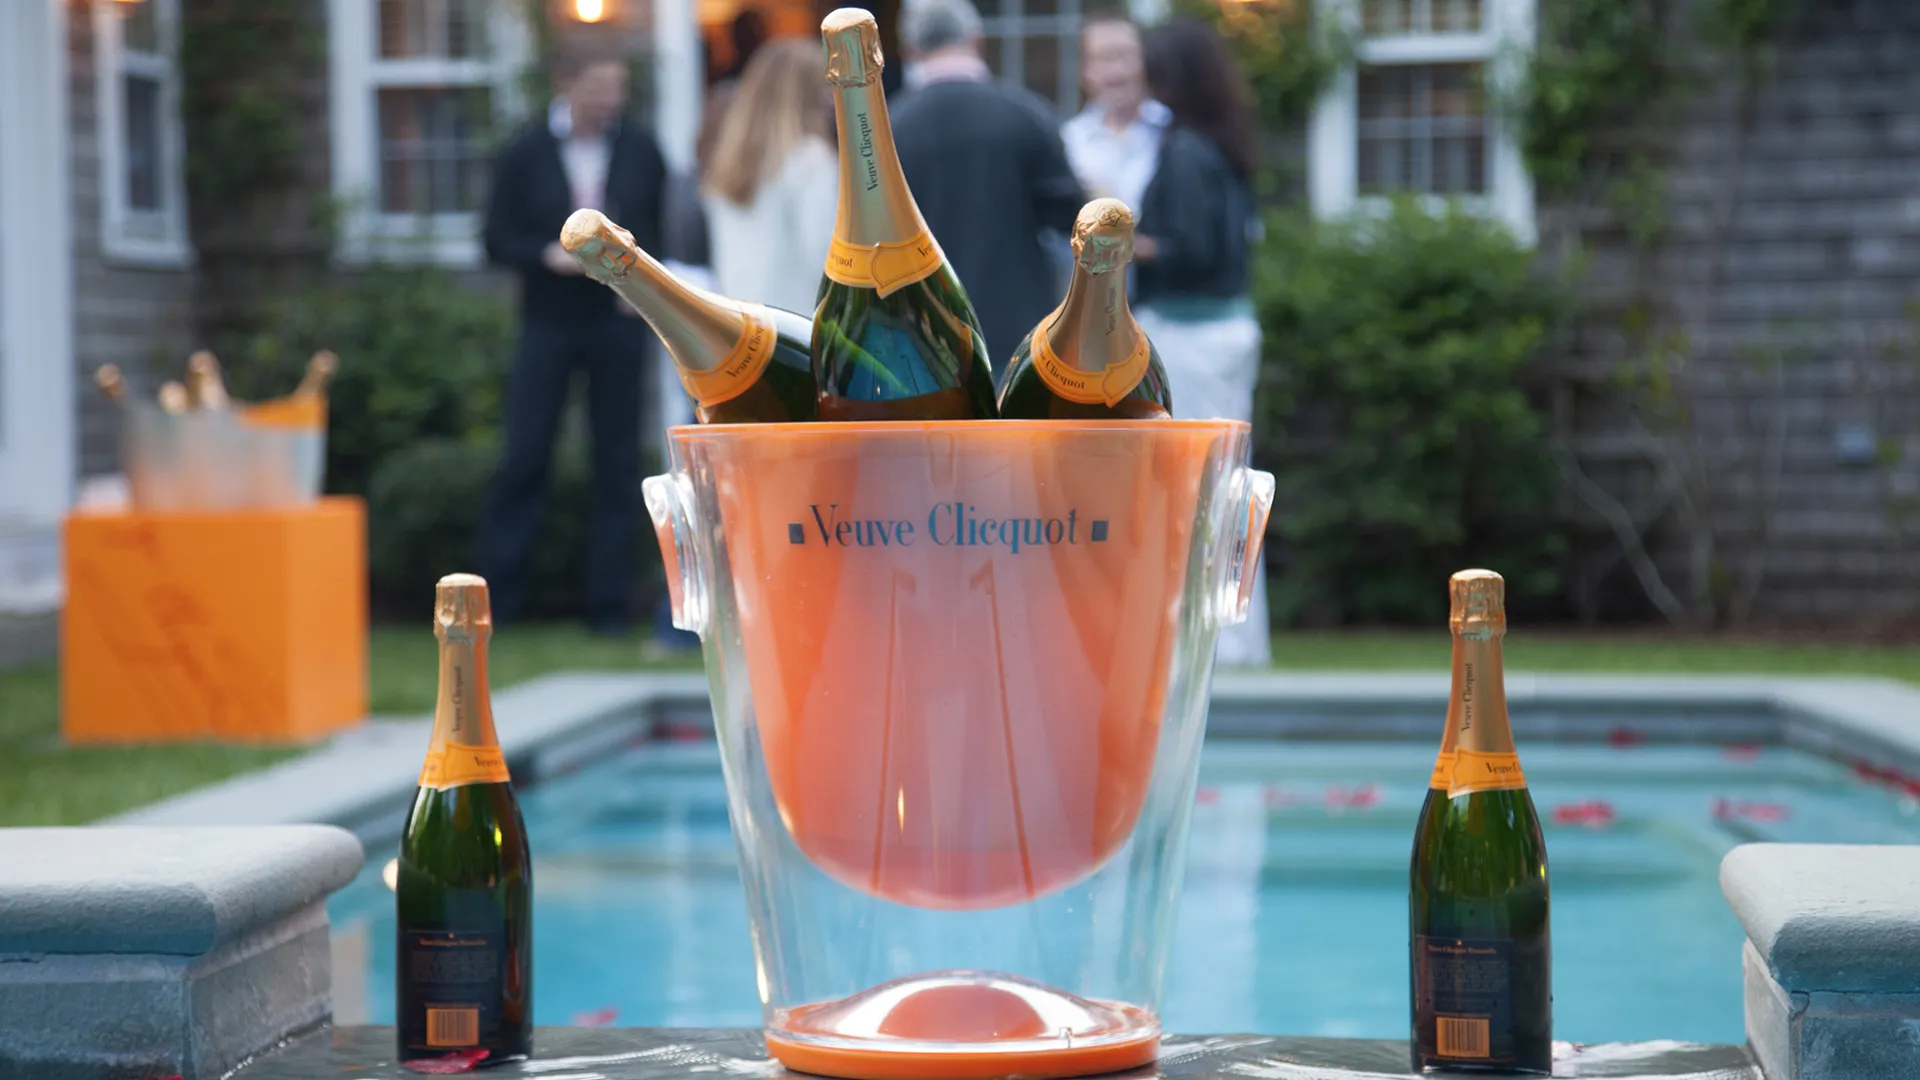 Nantucket Champagne event